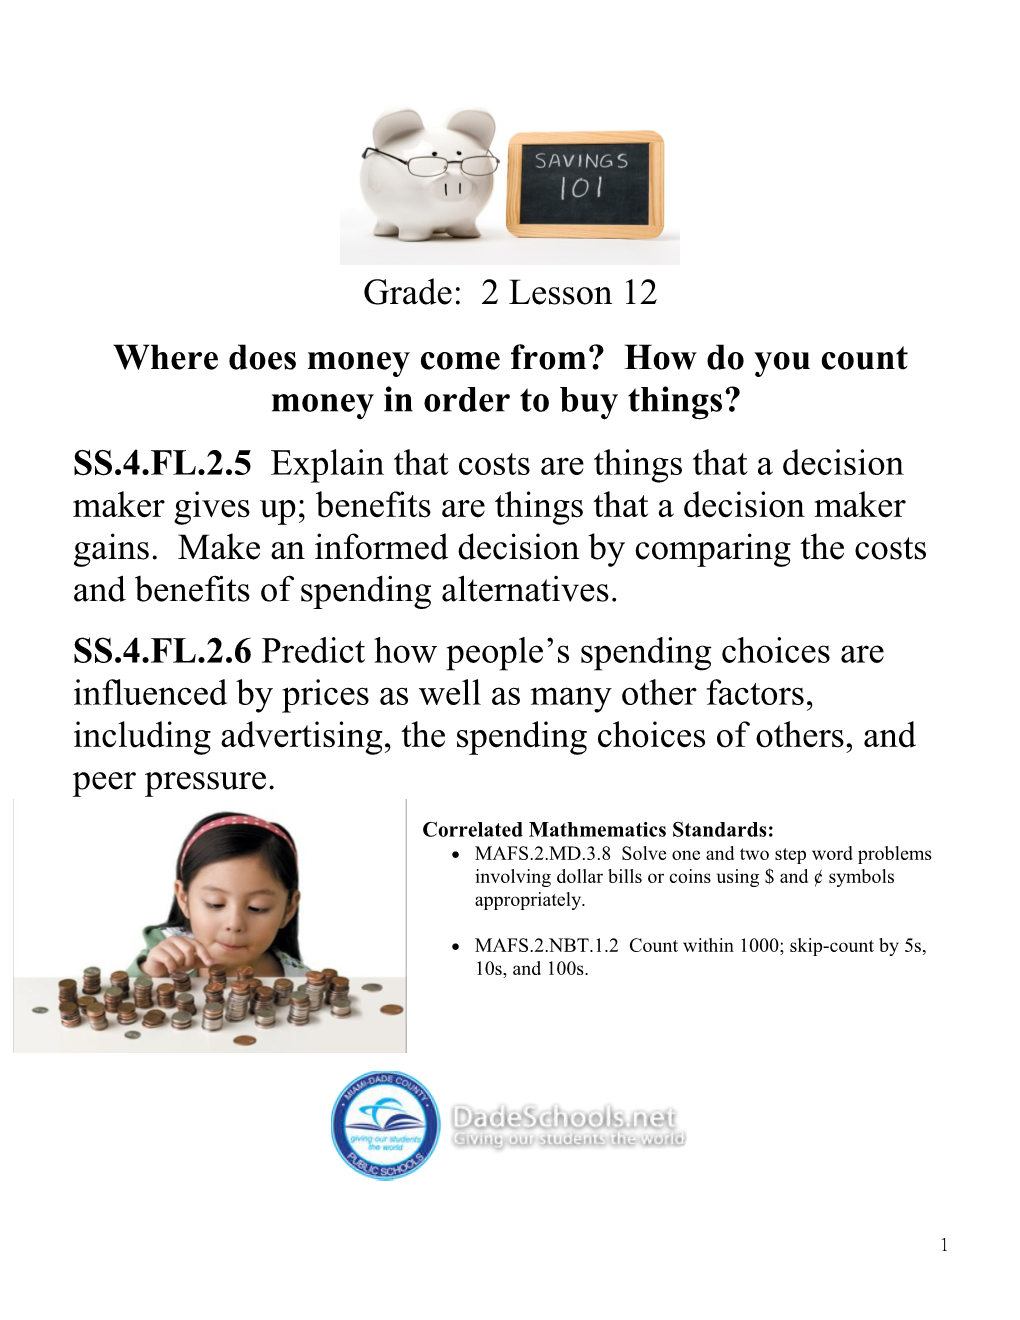 Where Does Money Come From? How Do You Count Money in Order to Buy Things?